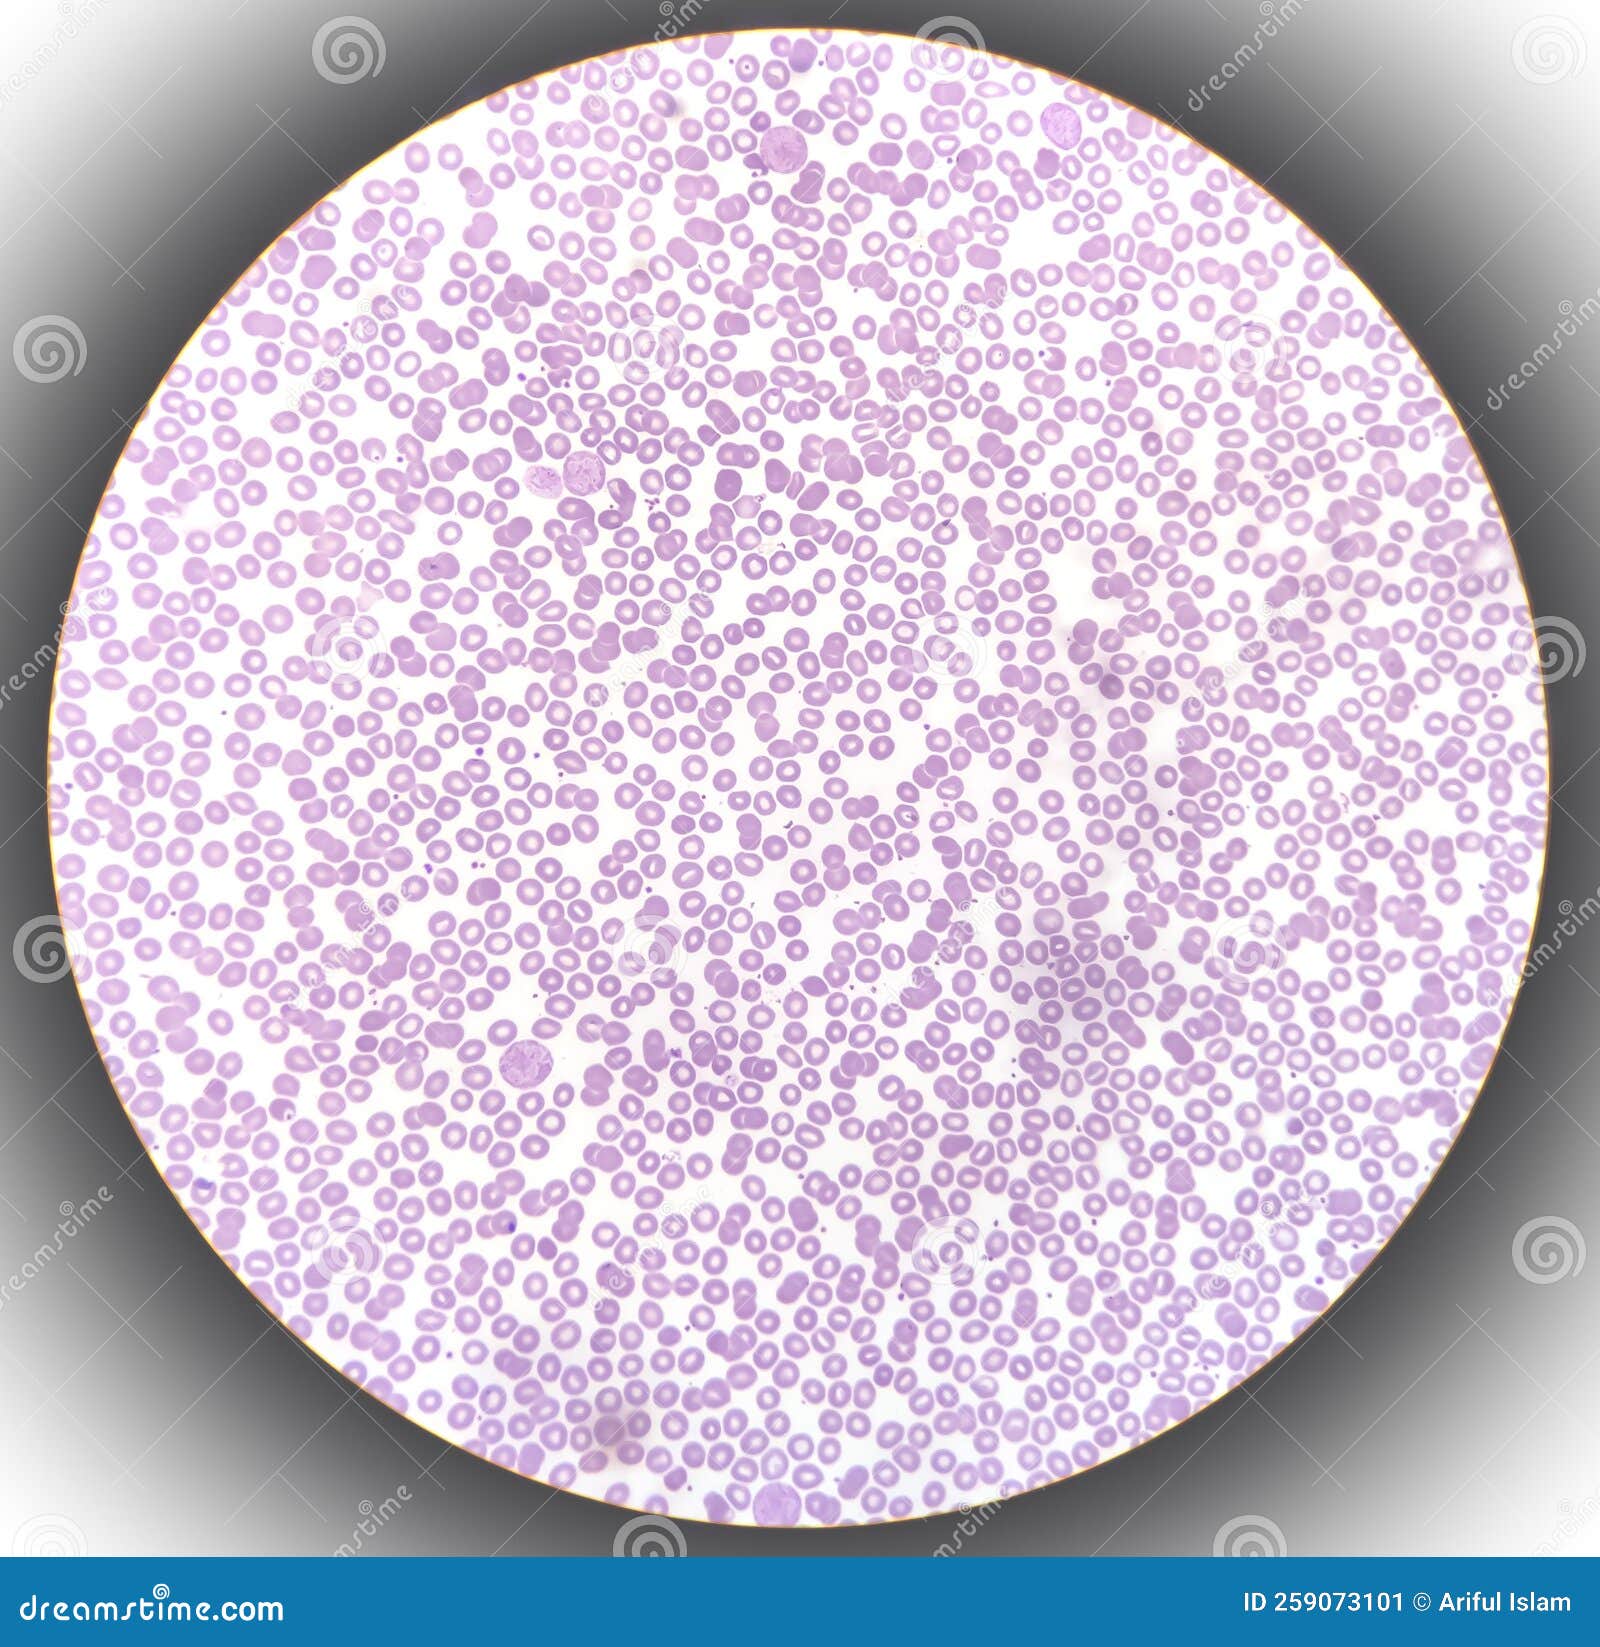 blood film showing a decrease of platelets